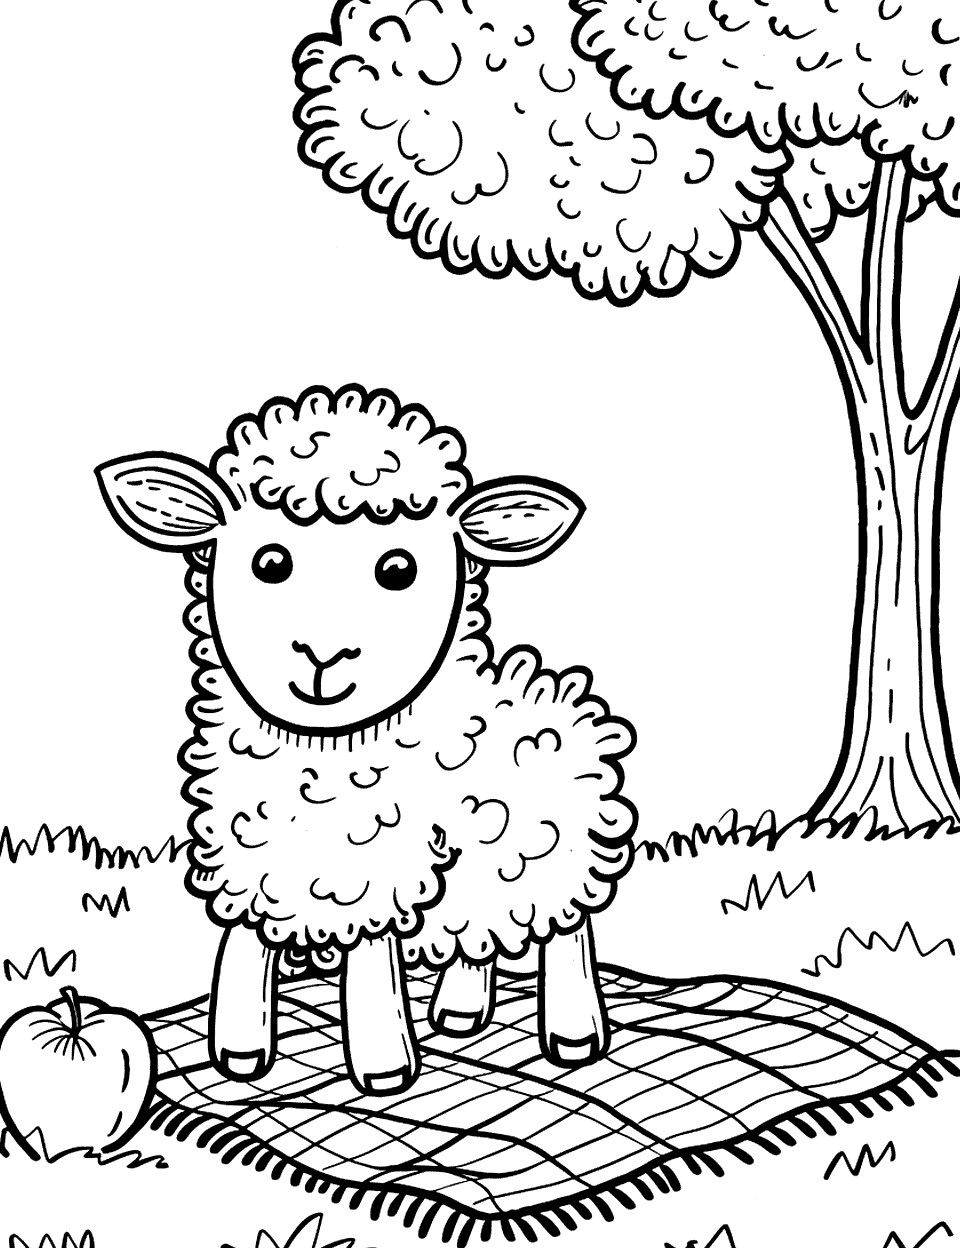 Sheep Enjoying a Picnic Coloring Page - A sheep sitting near a picnic blanket with an apple tree in the background.